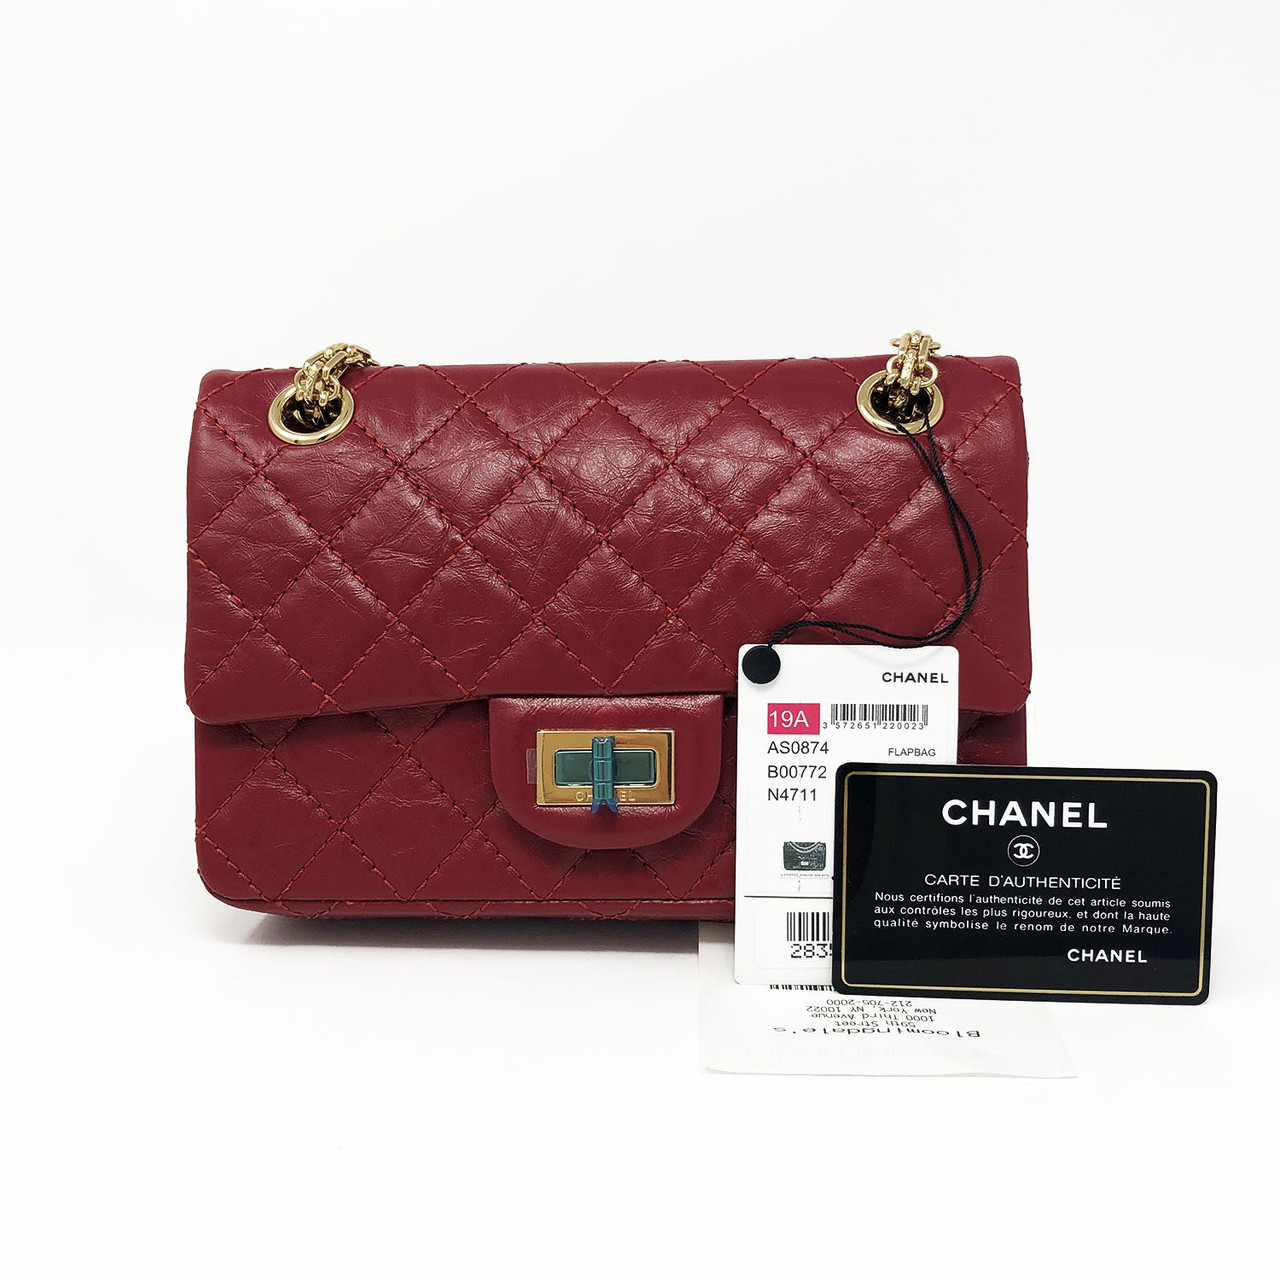 Chanel 19A Reissue Mini Red Aged Calfskin with shiny gold hardware